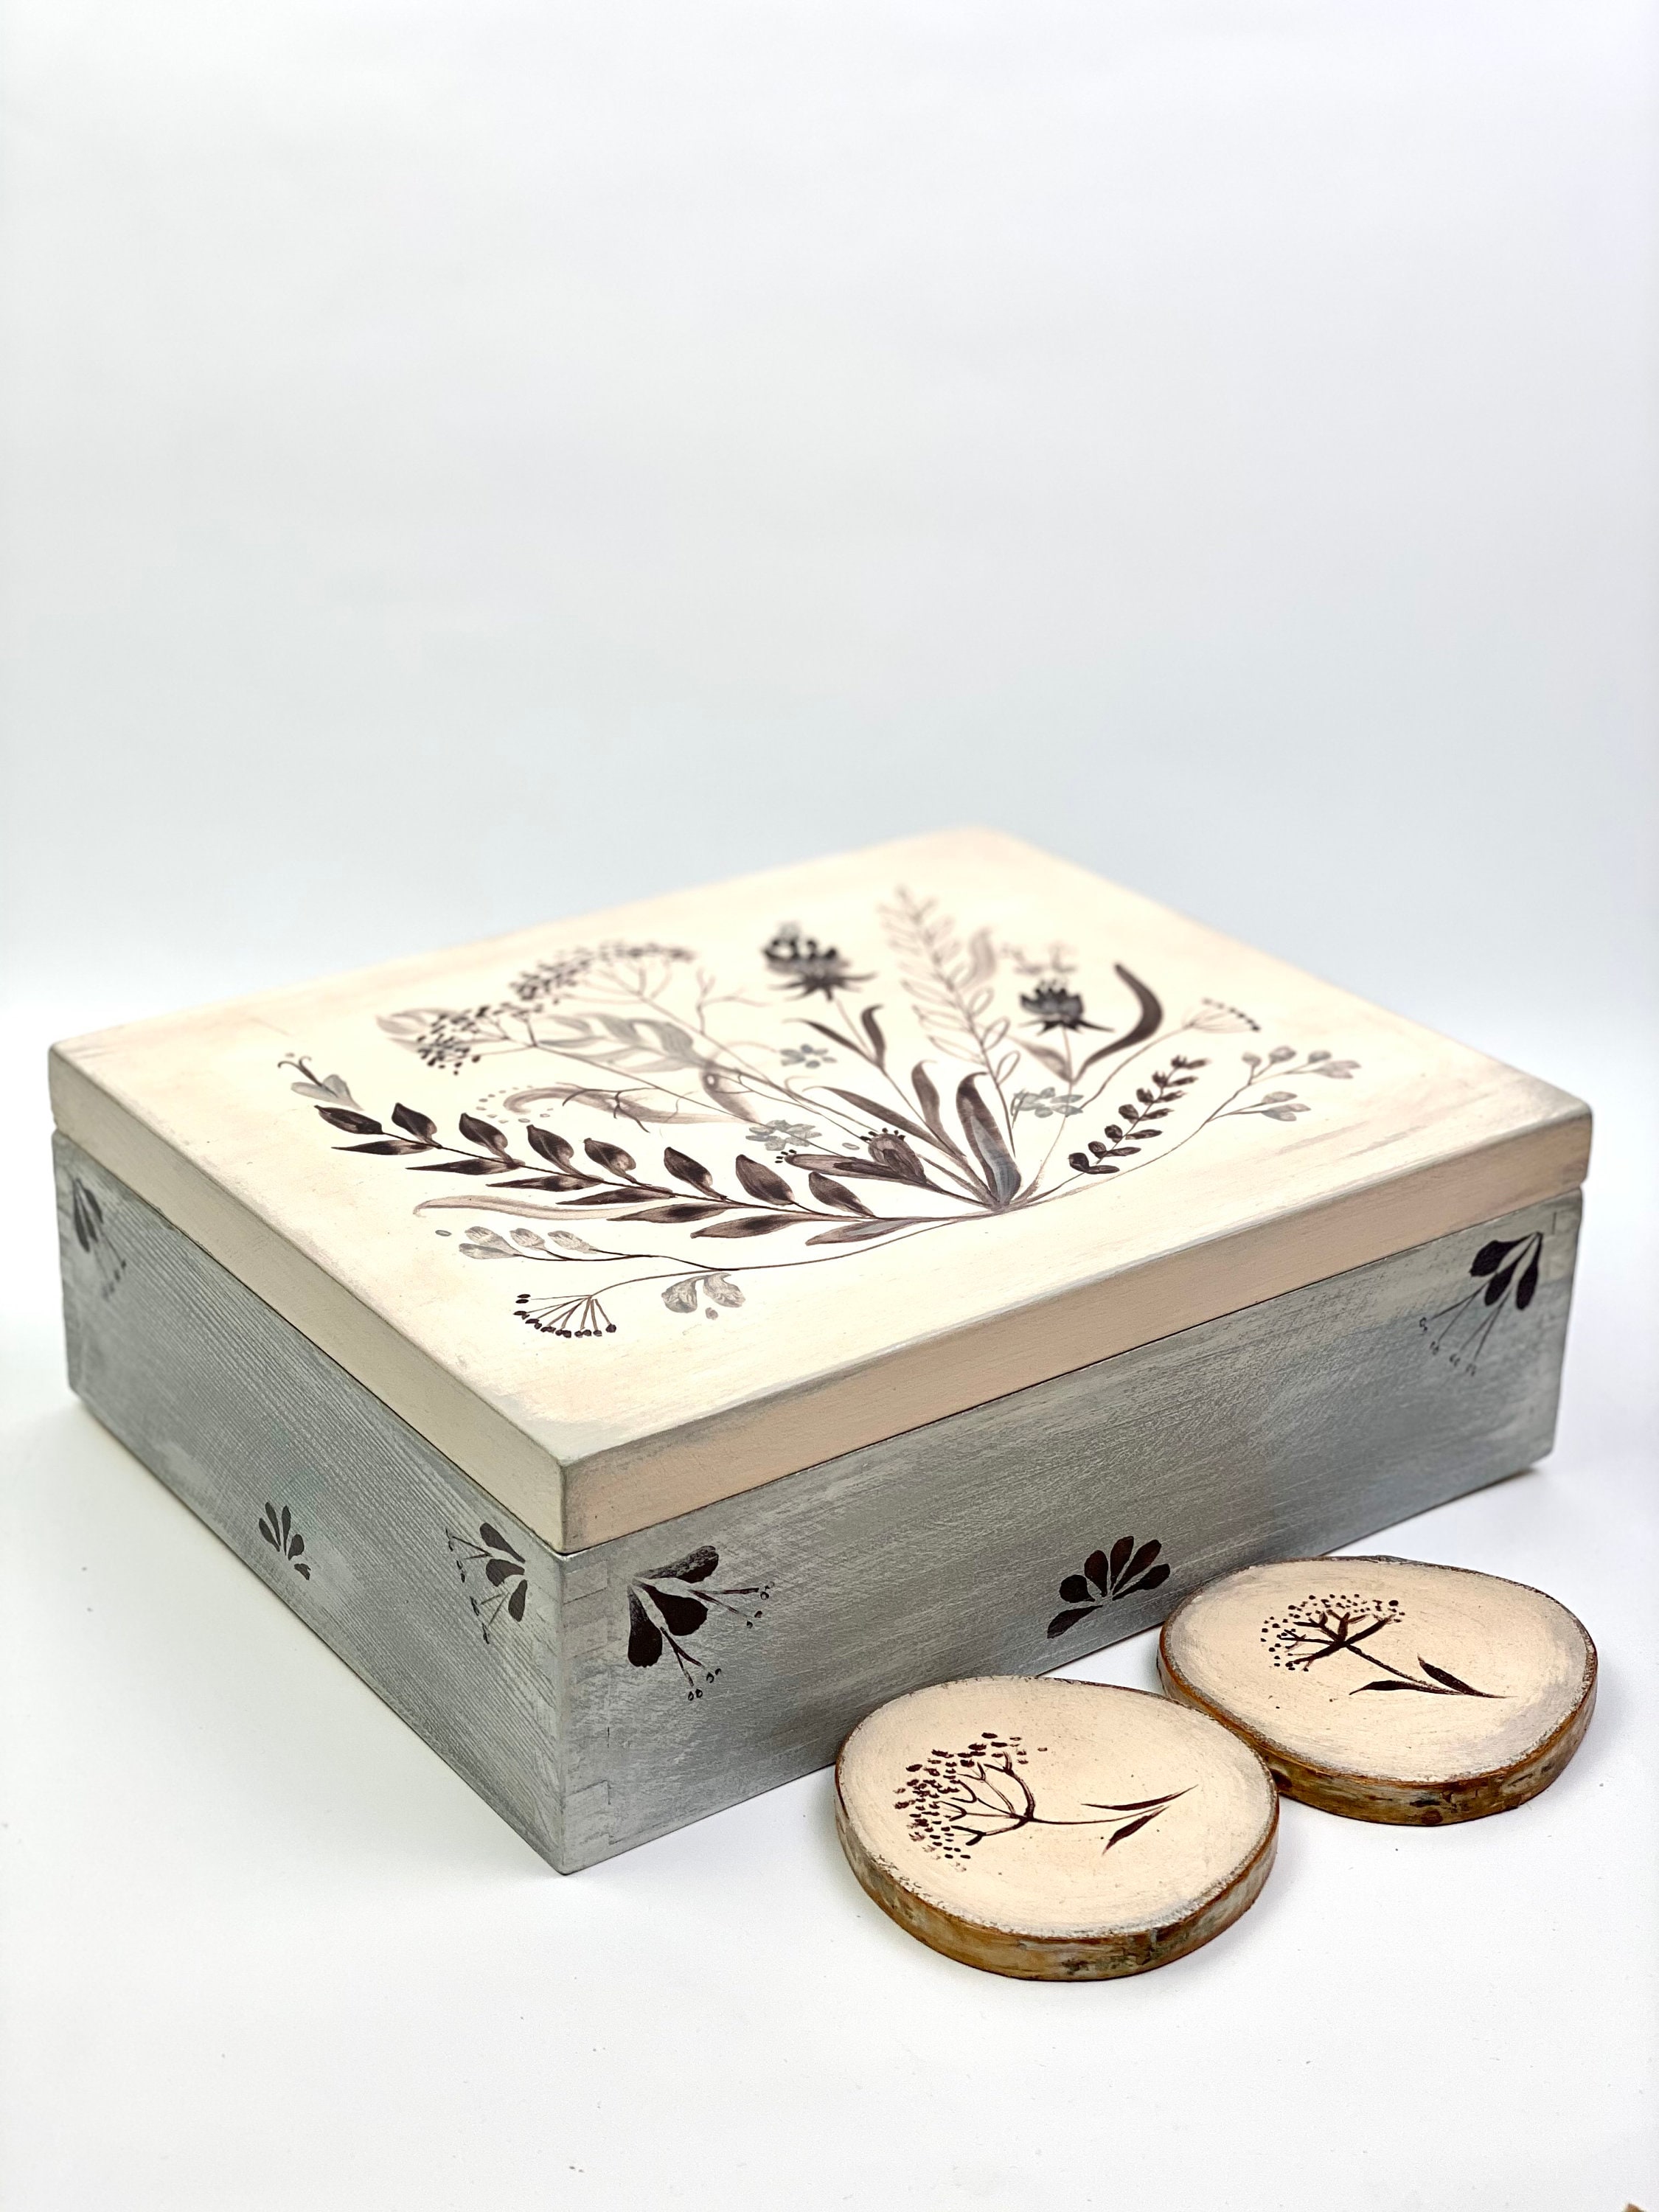 Space Home Tea Chest With 4 Compartments and Lid Wooden Tea Box 18 x 18 cm Tea Bags Organizer Container Tea Storage Chest 